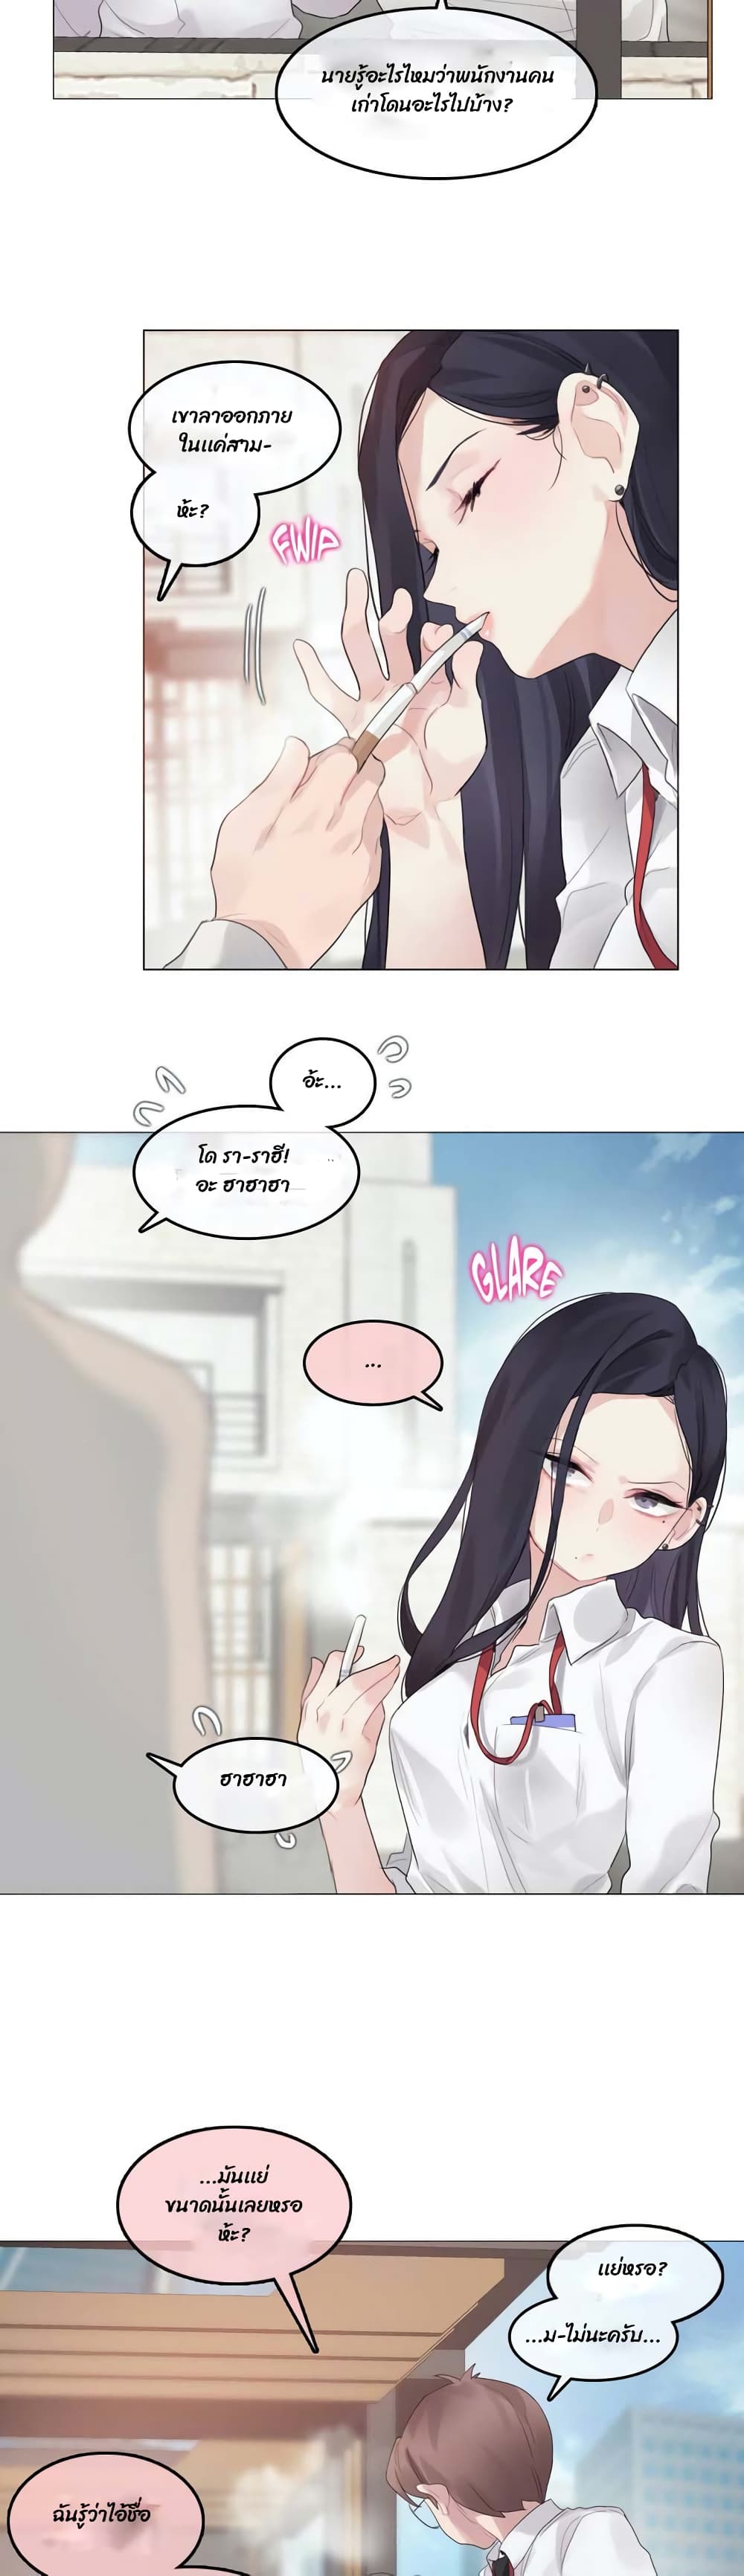 A Pervert's Daily Life 92 (15)